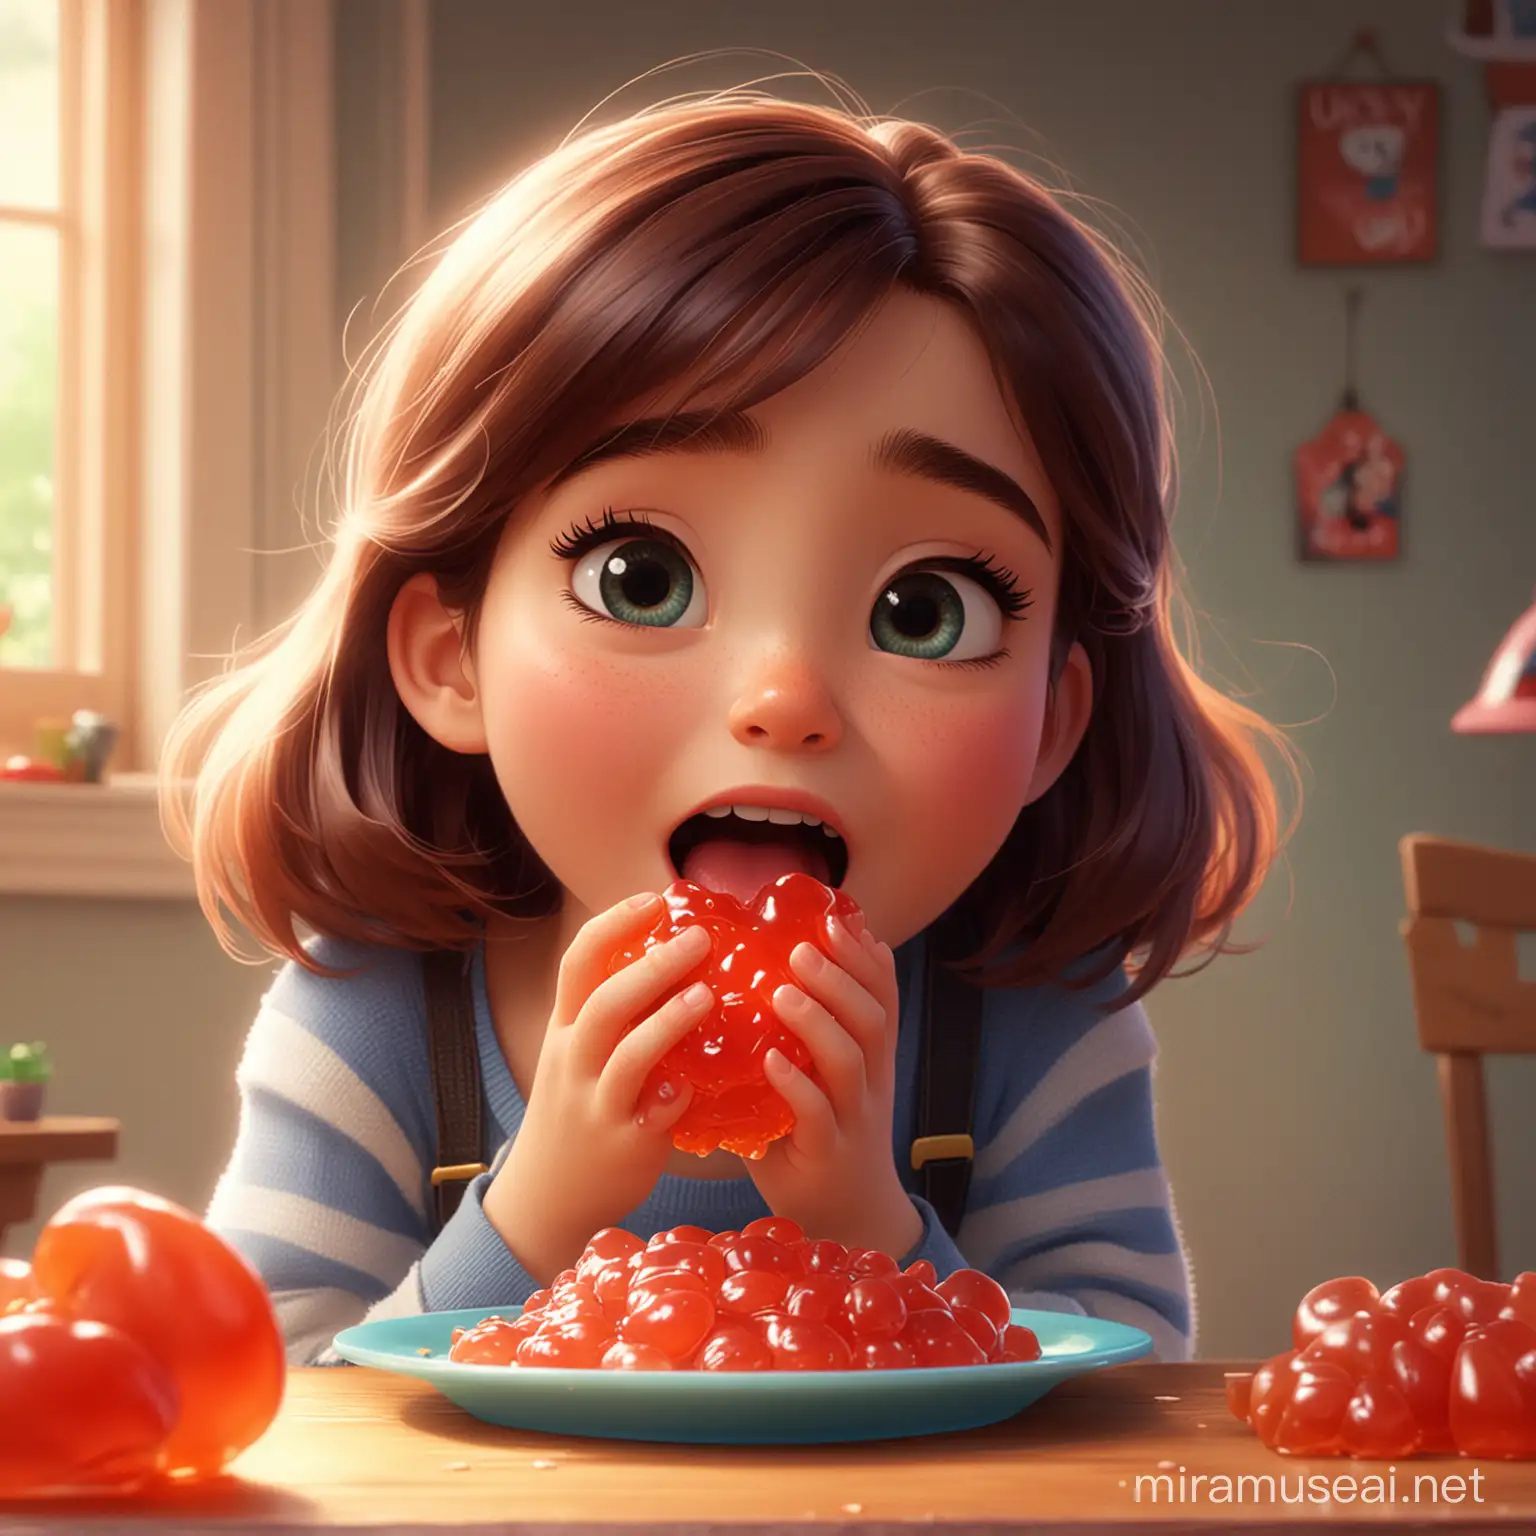 a girl is eating a big jelly ,disney pixar style